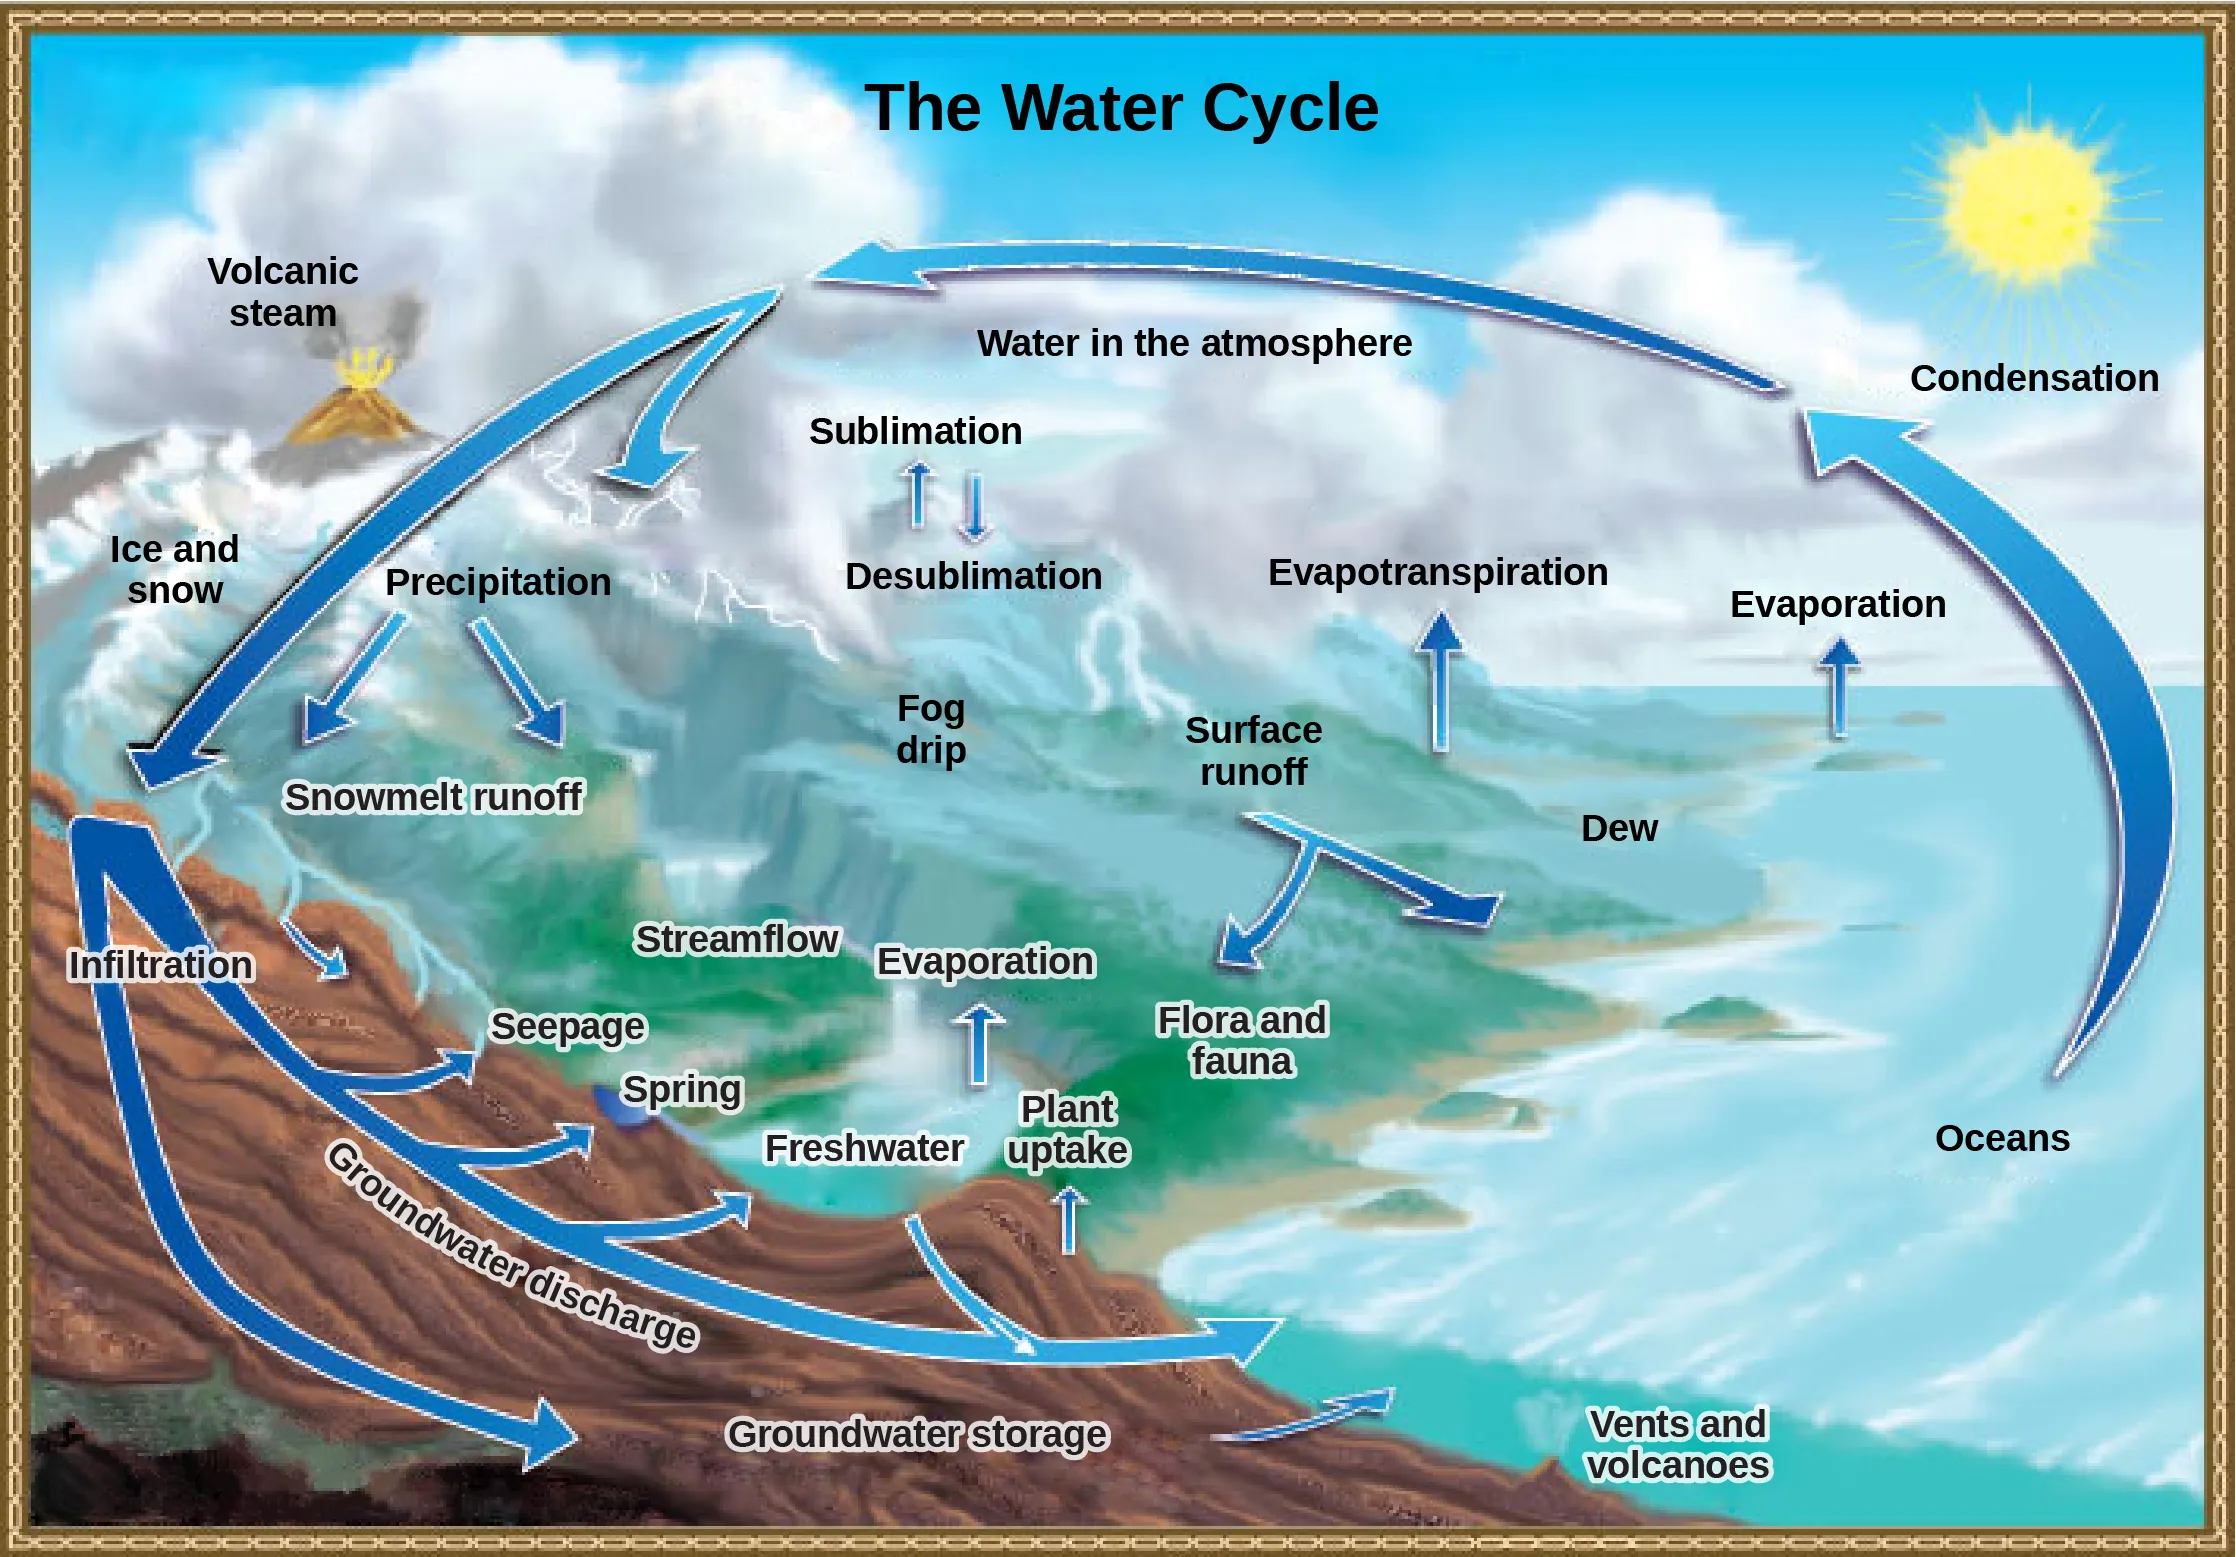  Illustration shows the water cycle. Water enters the atmosphere through evaporation, evapotranspiration, sublimation, and volcanic steam. Condensation in the atmosphere turns water vapor into clouds. Water from the atmosphere returns to the Earth via precipitation or desublimation. Some of this water infiltrates the ground to become groundwater. Seepage, freshwater springs, and plant uptake return some of this water to the surface. The remaining water seeps into the oceans. The remaining surface water enters streams and freshwater lakes, where it eventually enters the ocean via surface runoff. Some water also enters the ocean via underwater vents or volcanoes.